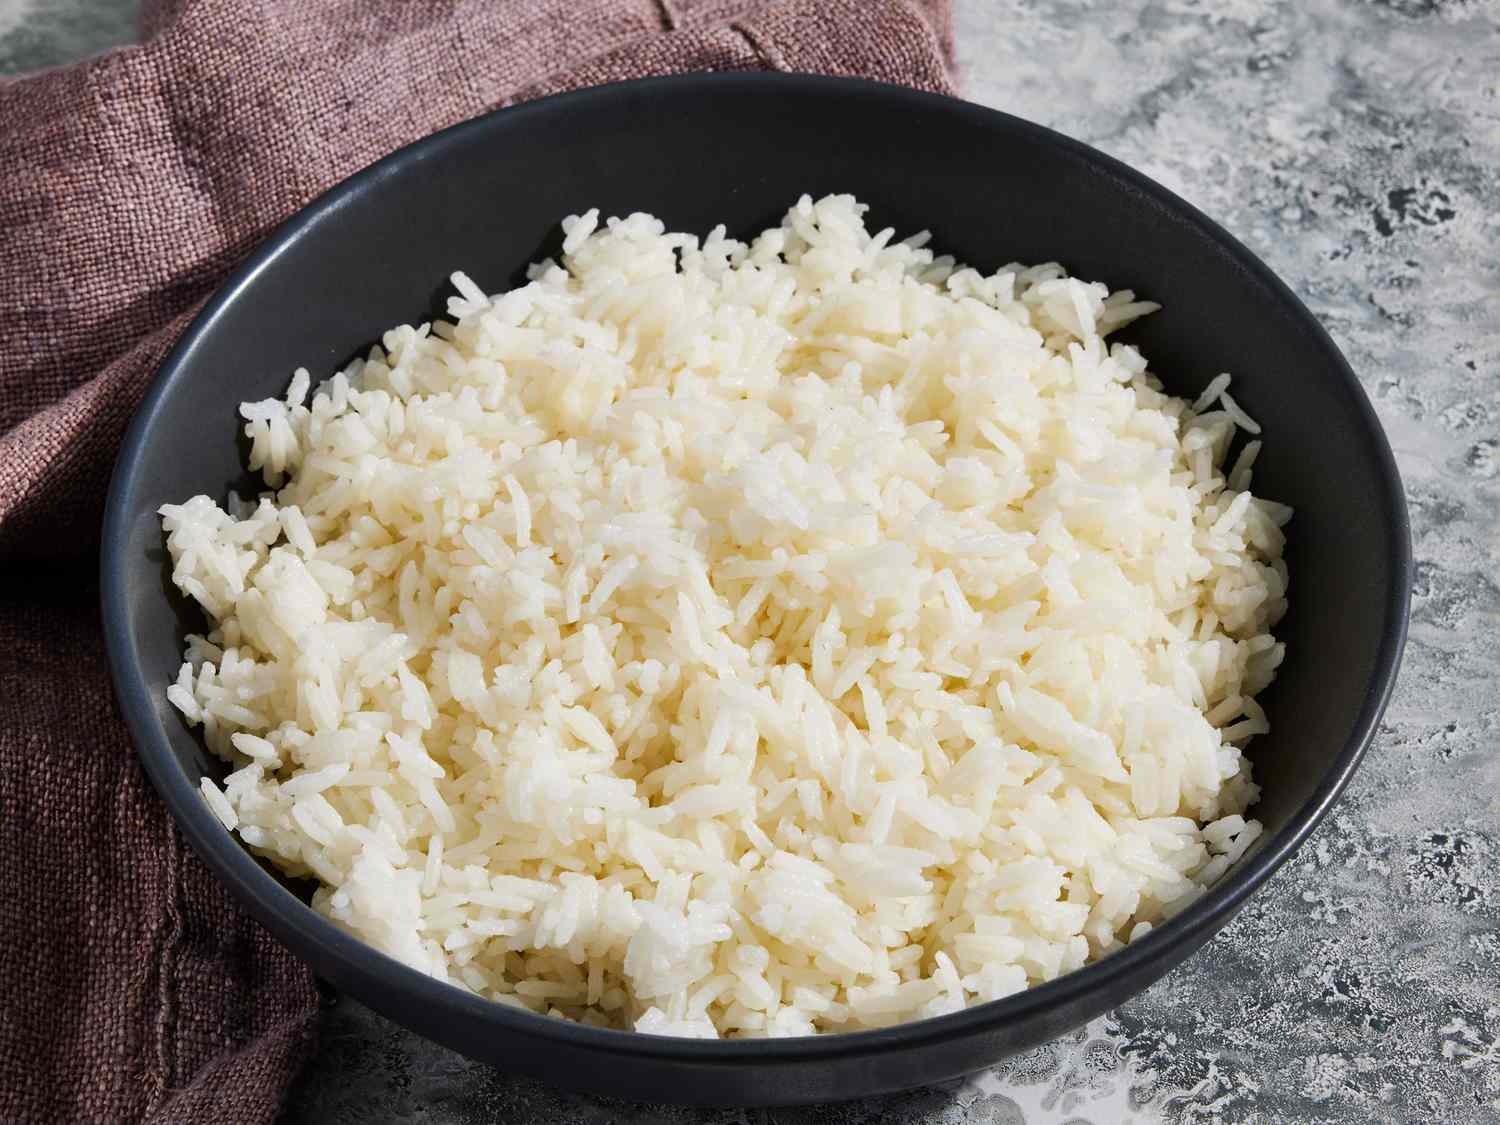 https://recipes.net/wp-content/uploads/2023/12/how-to-cook-1-cup-of-rice-in-the-microwave-1703233719.jpg